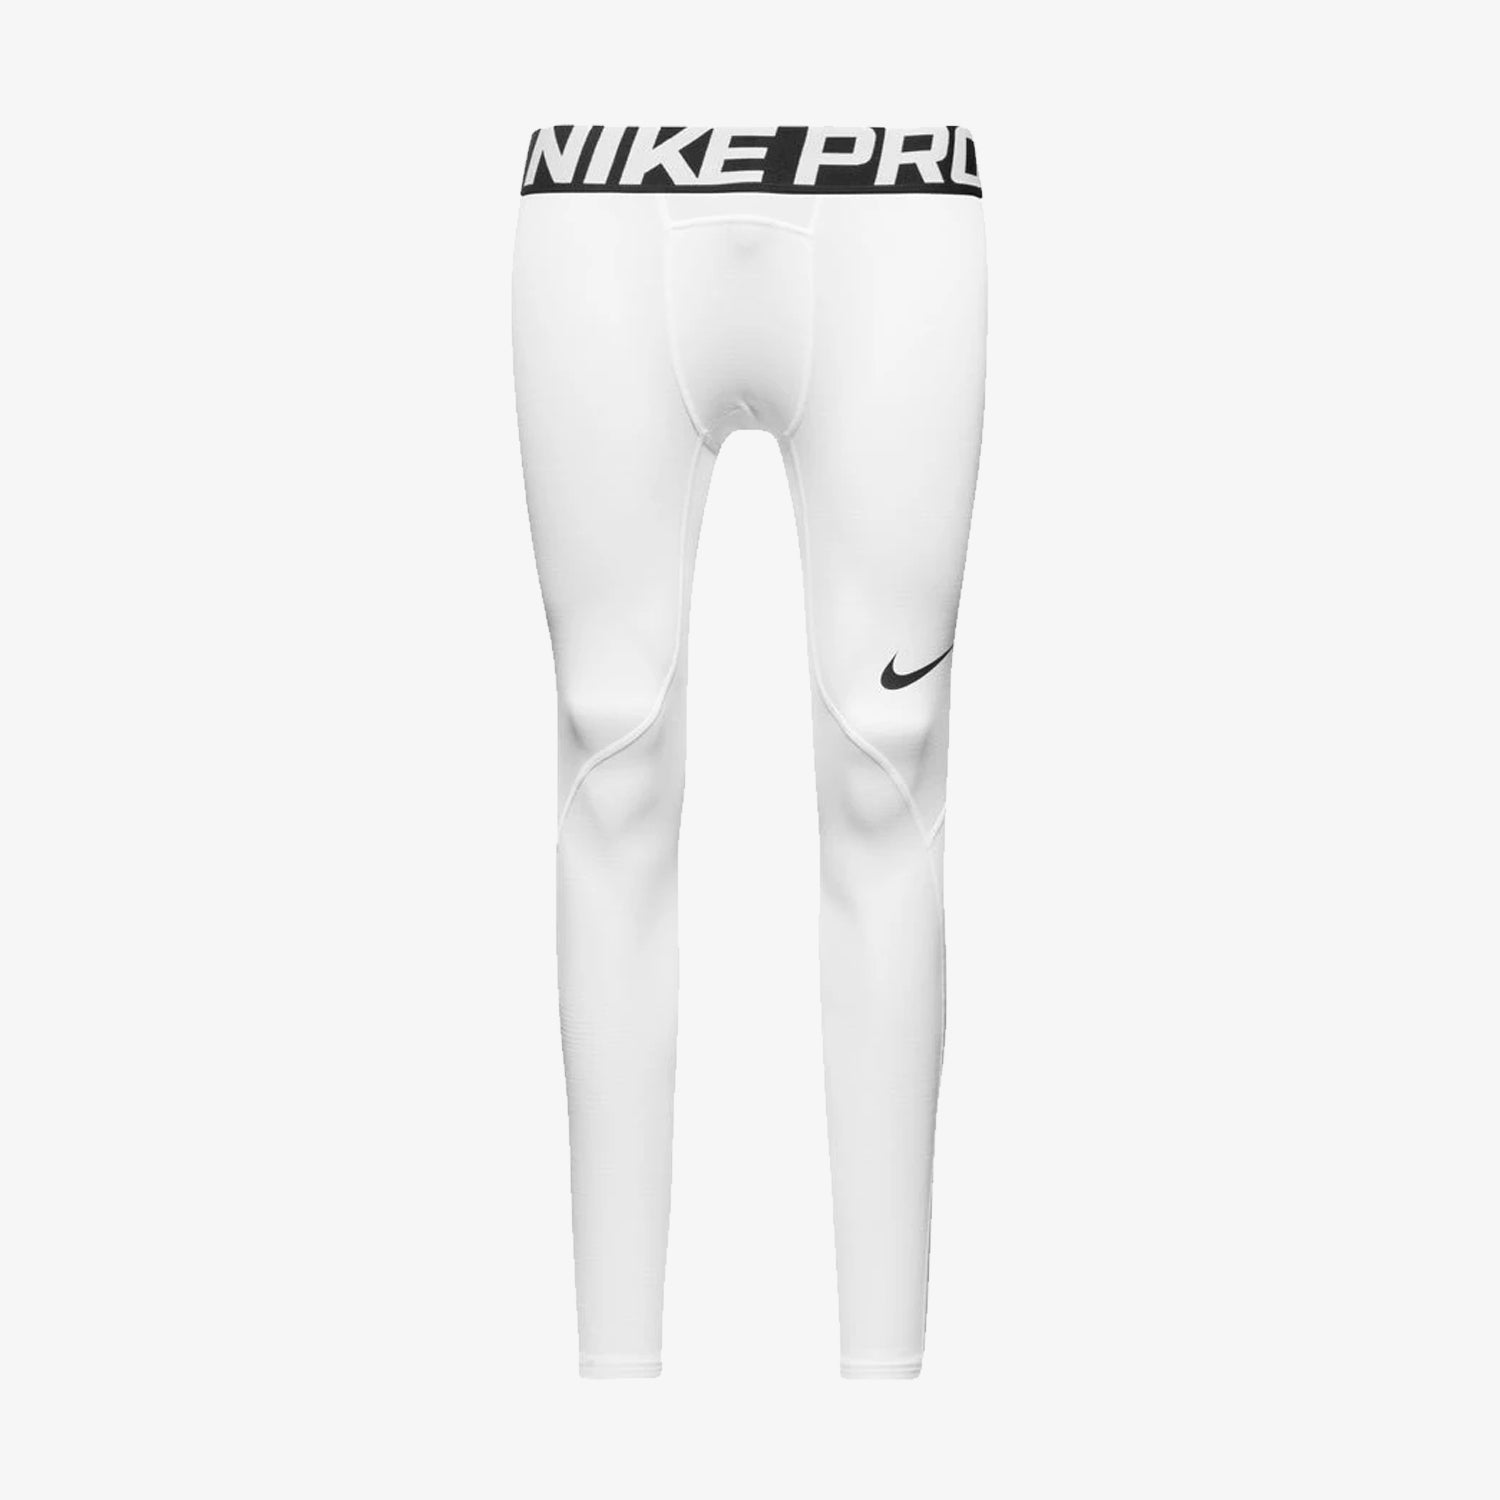 Pro Youth Warm Tights - White